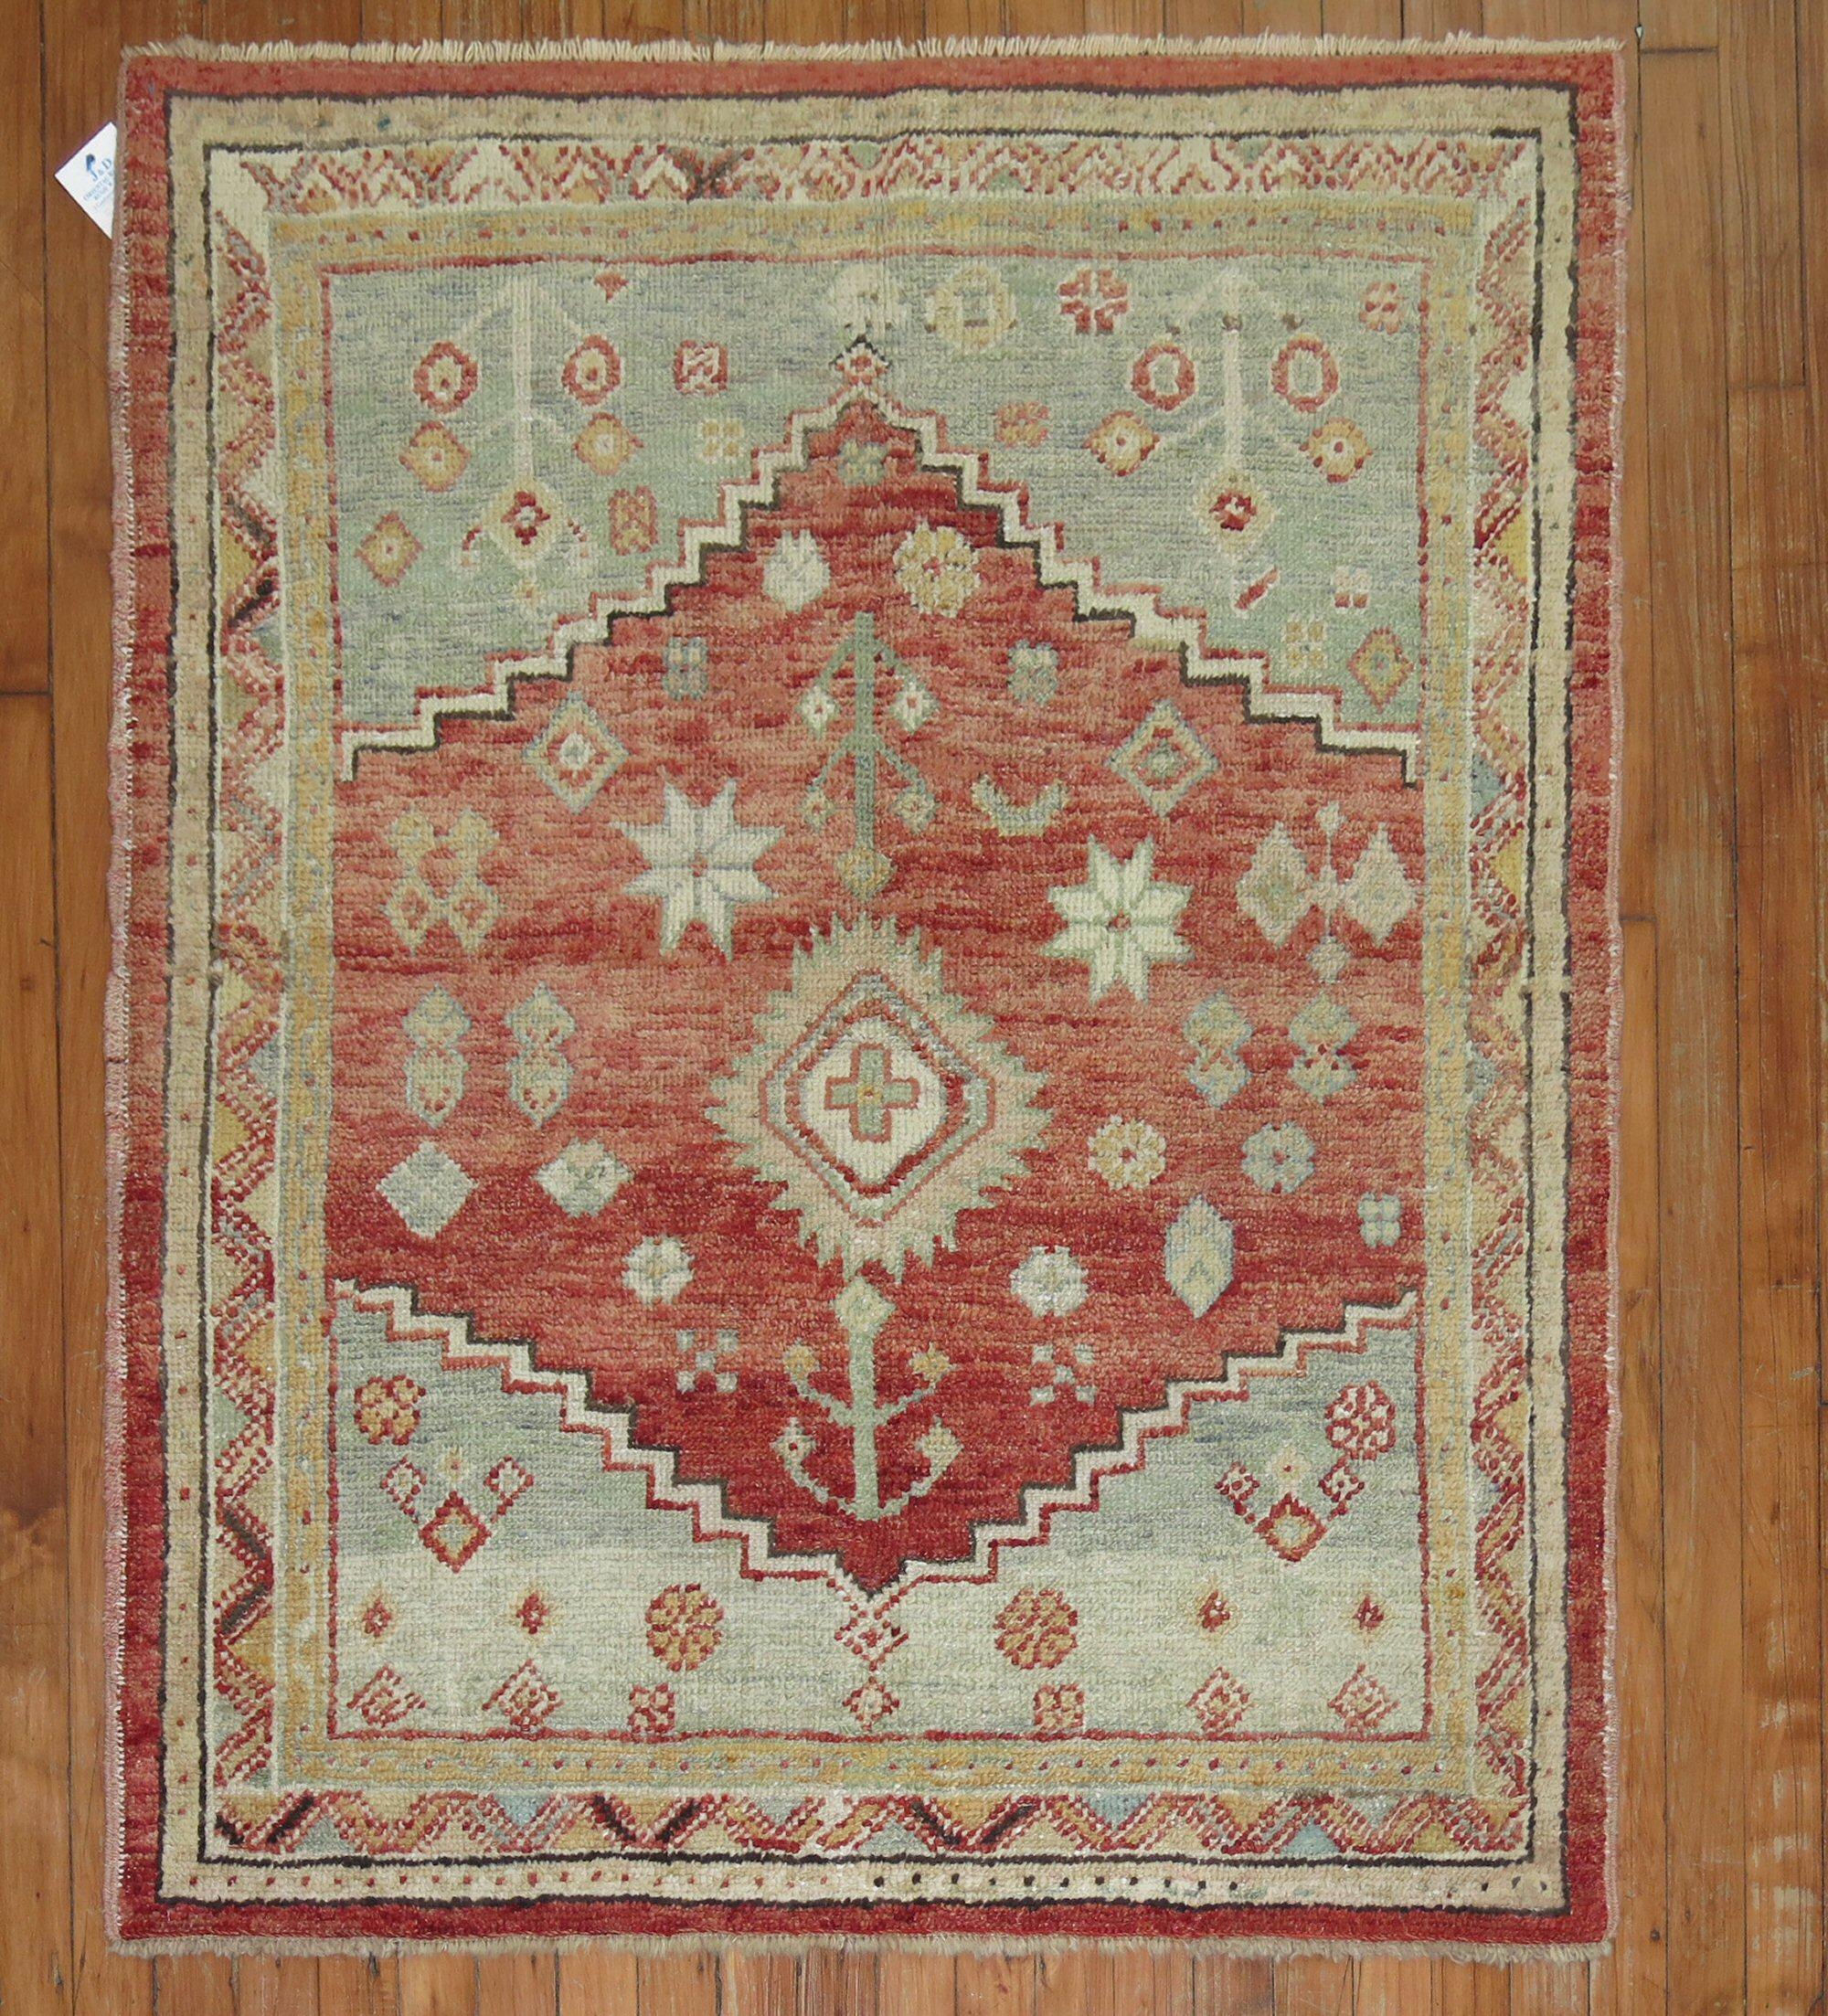 Early 20th-century authentic Anatolian square scatter rug 

Measures: 3'7'' x 4'5''
